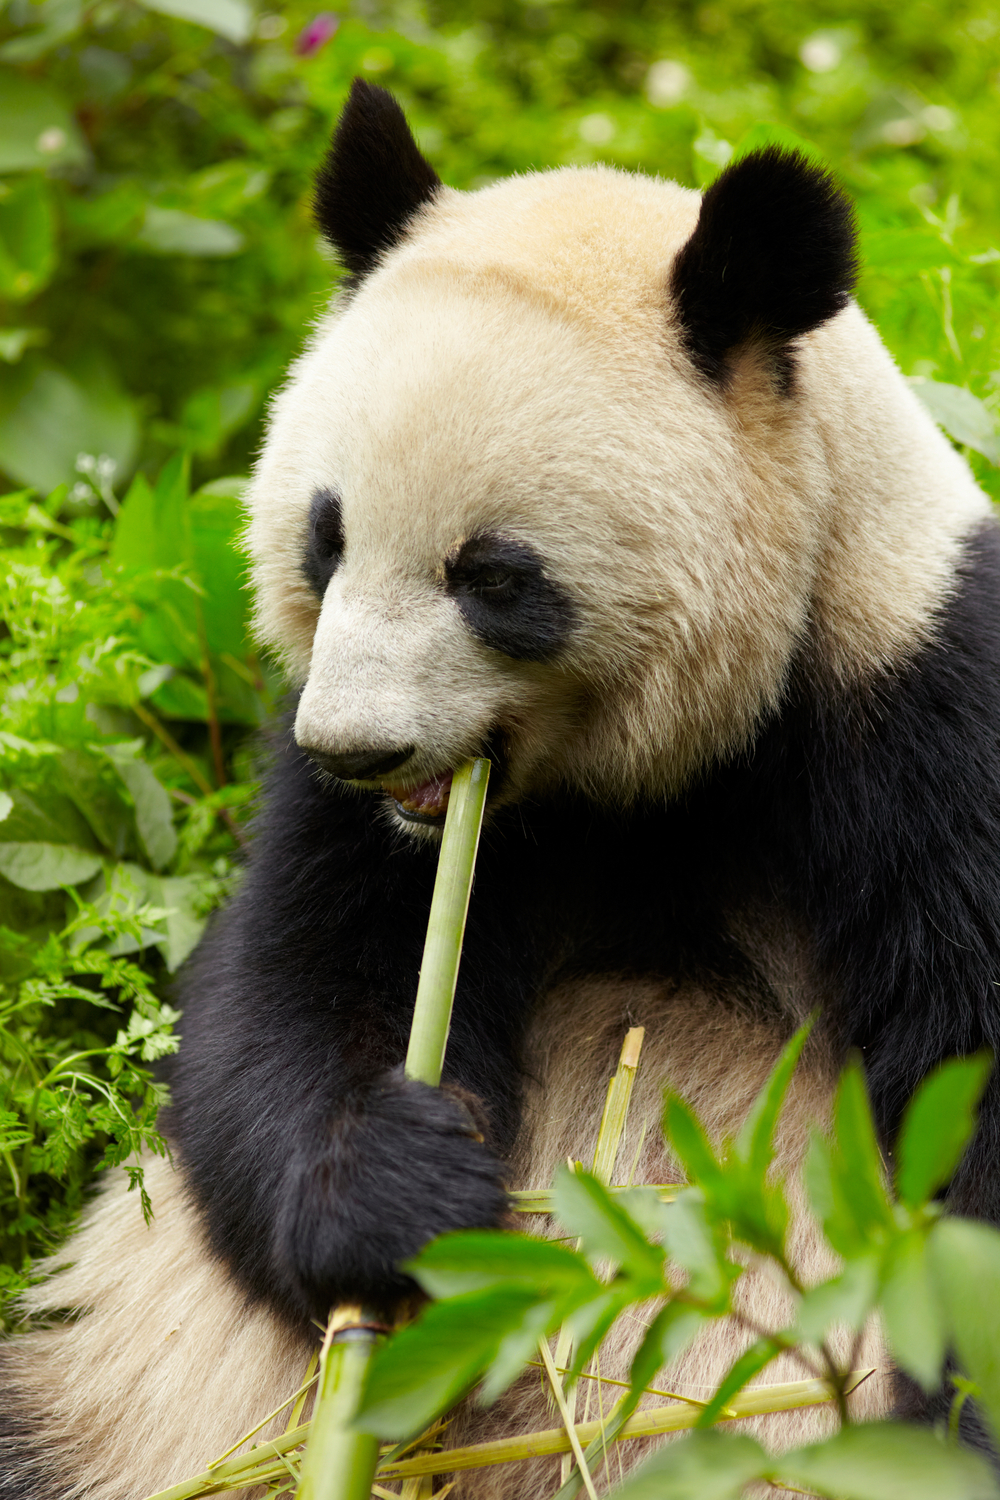 The paradox of a panda’s diet